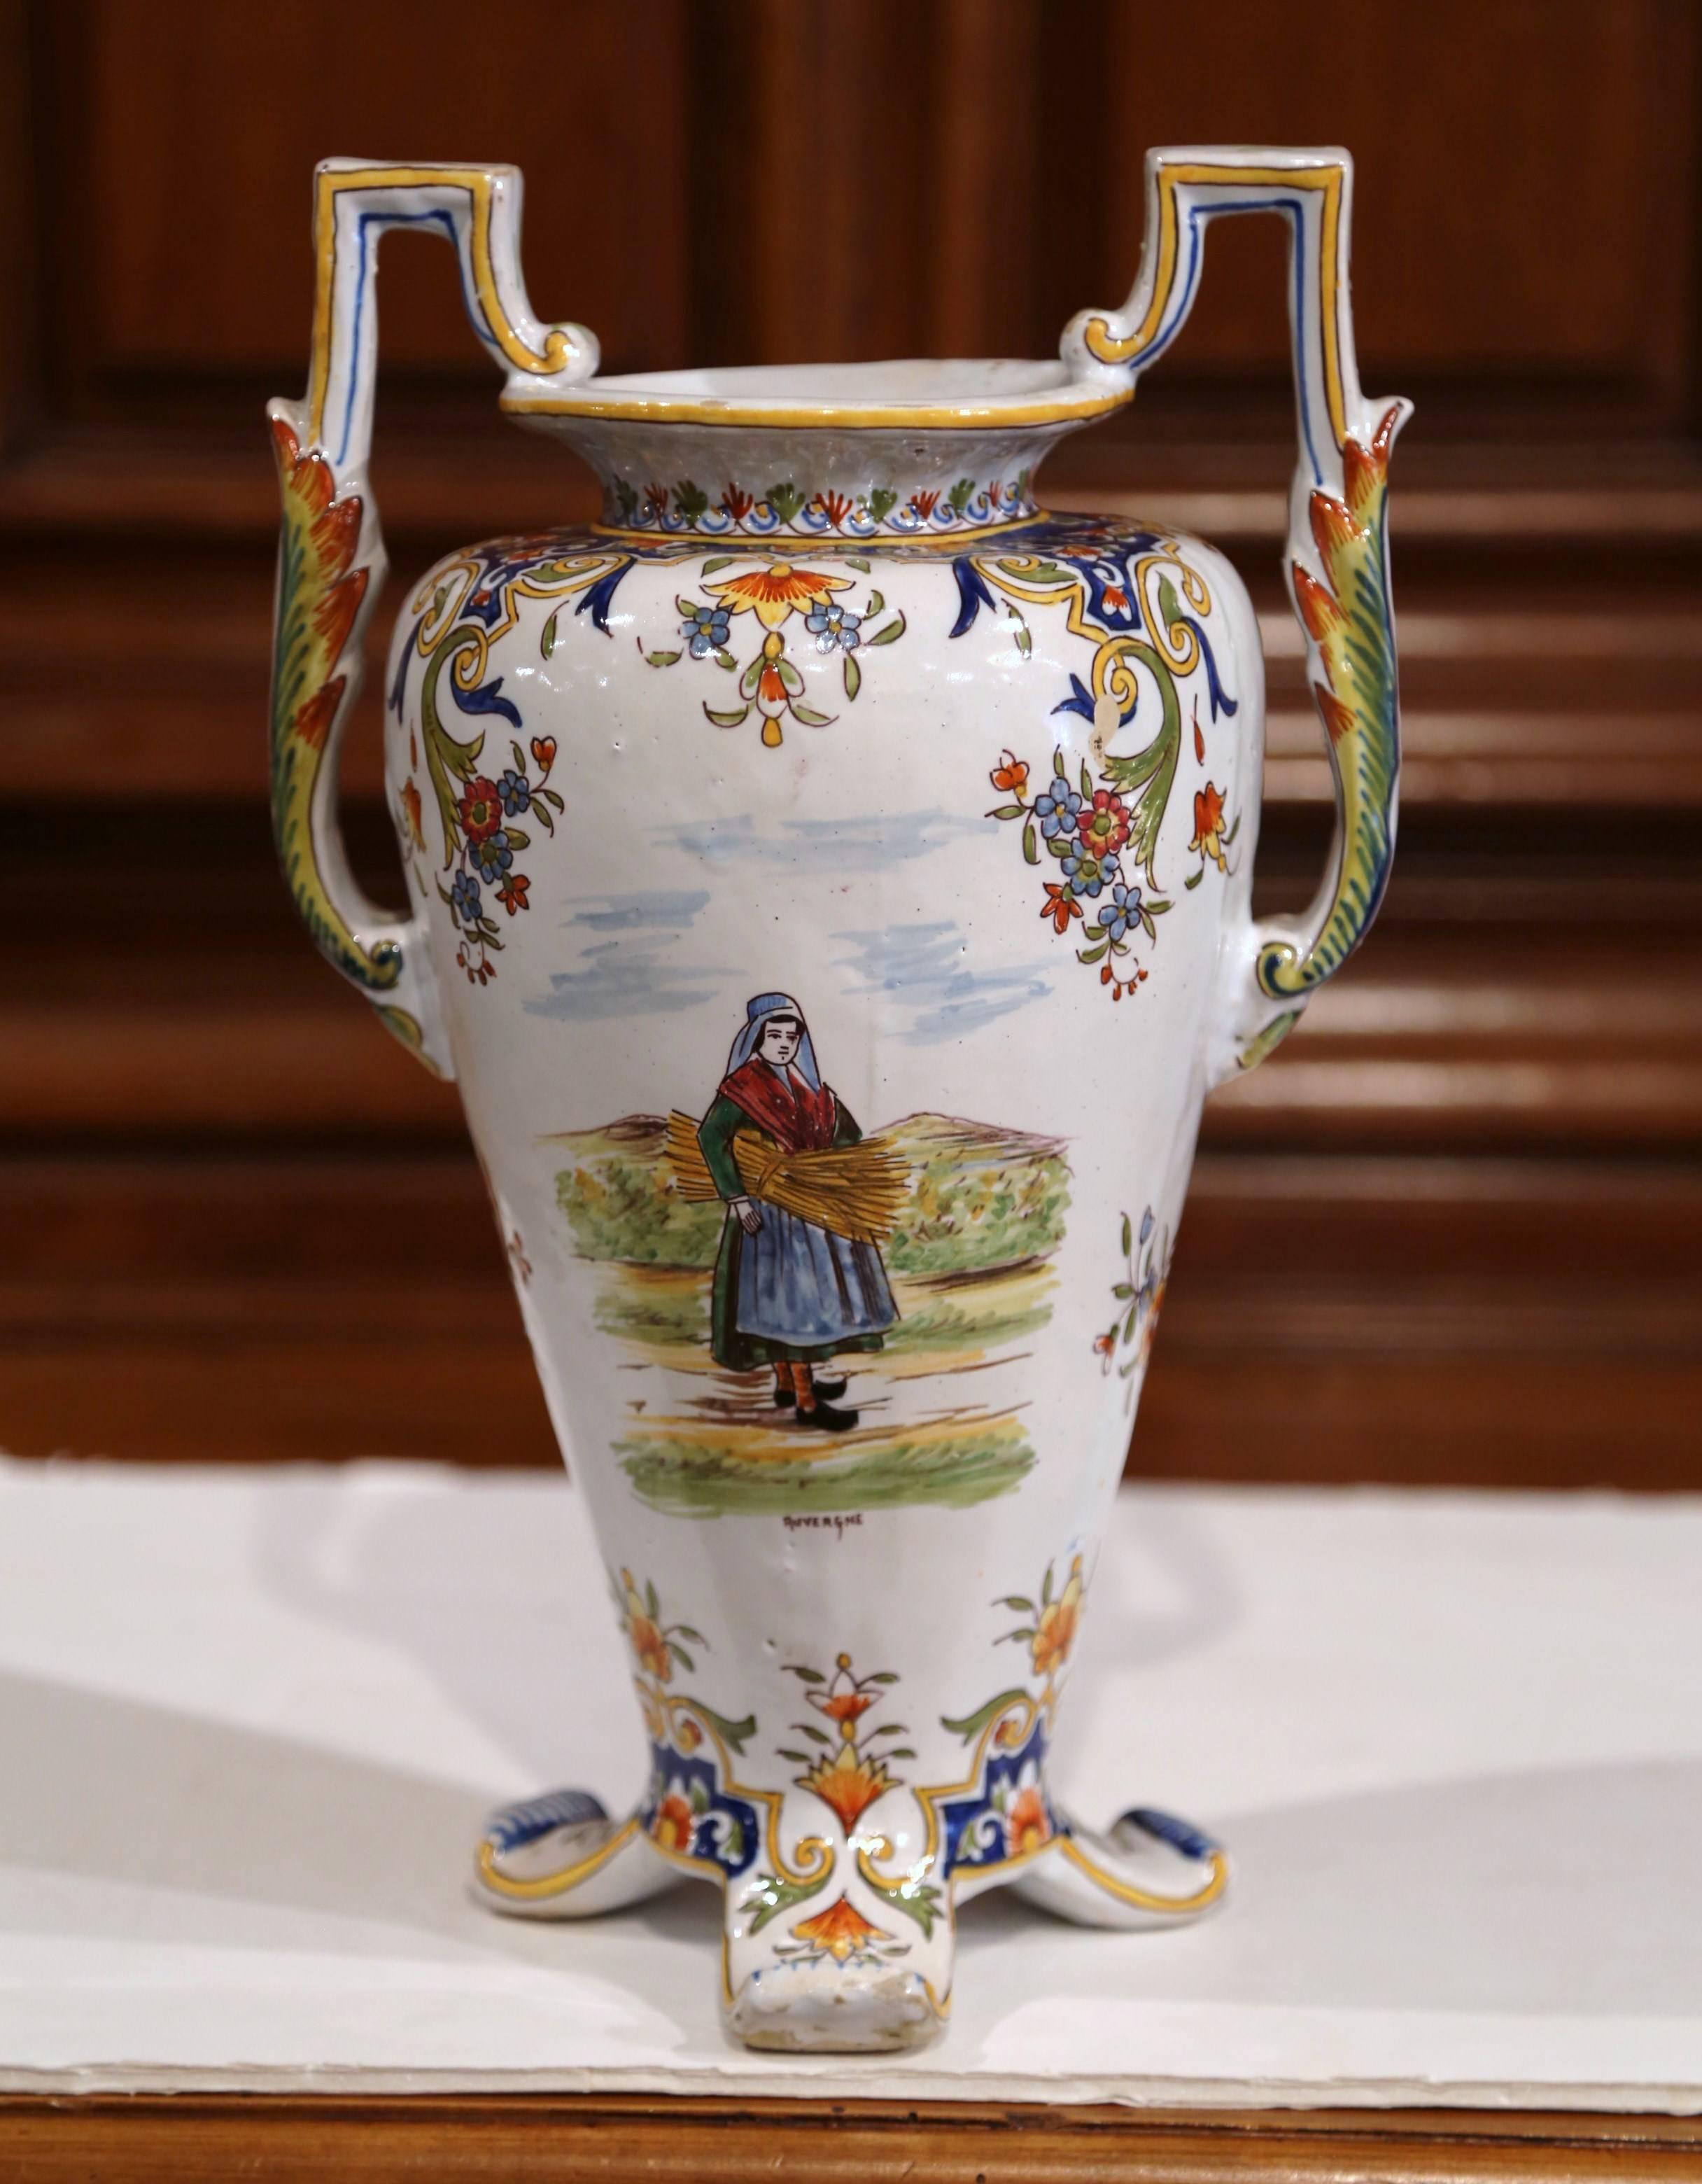 Ceramic 19th Century French Hand Painted Faience Vase with Handles from Normandy